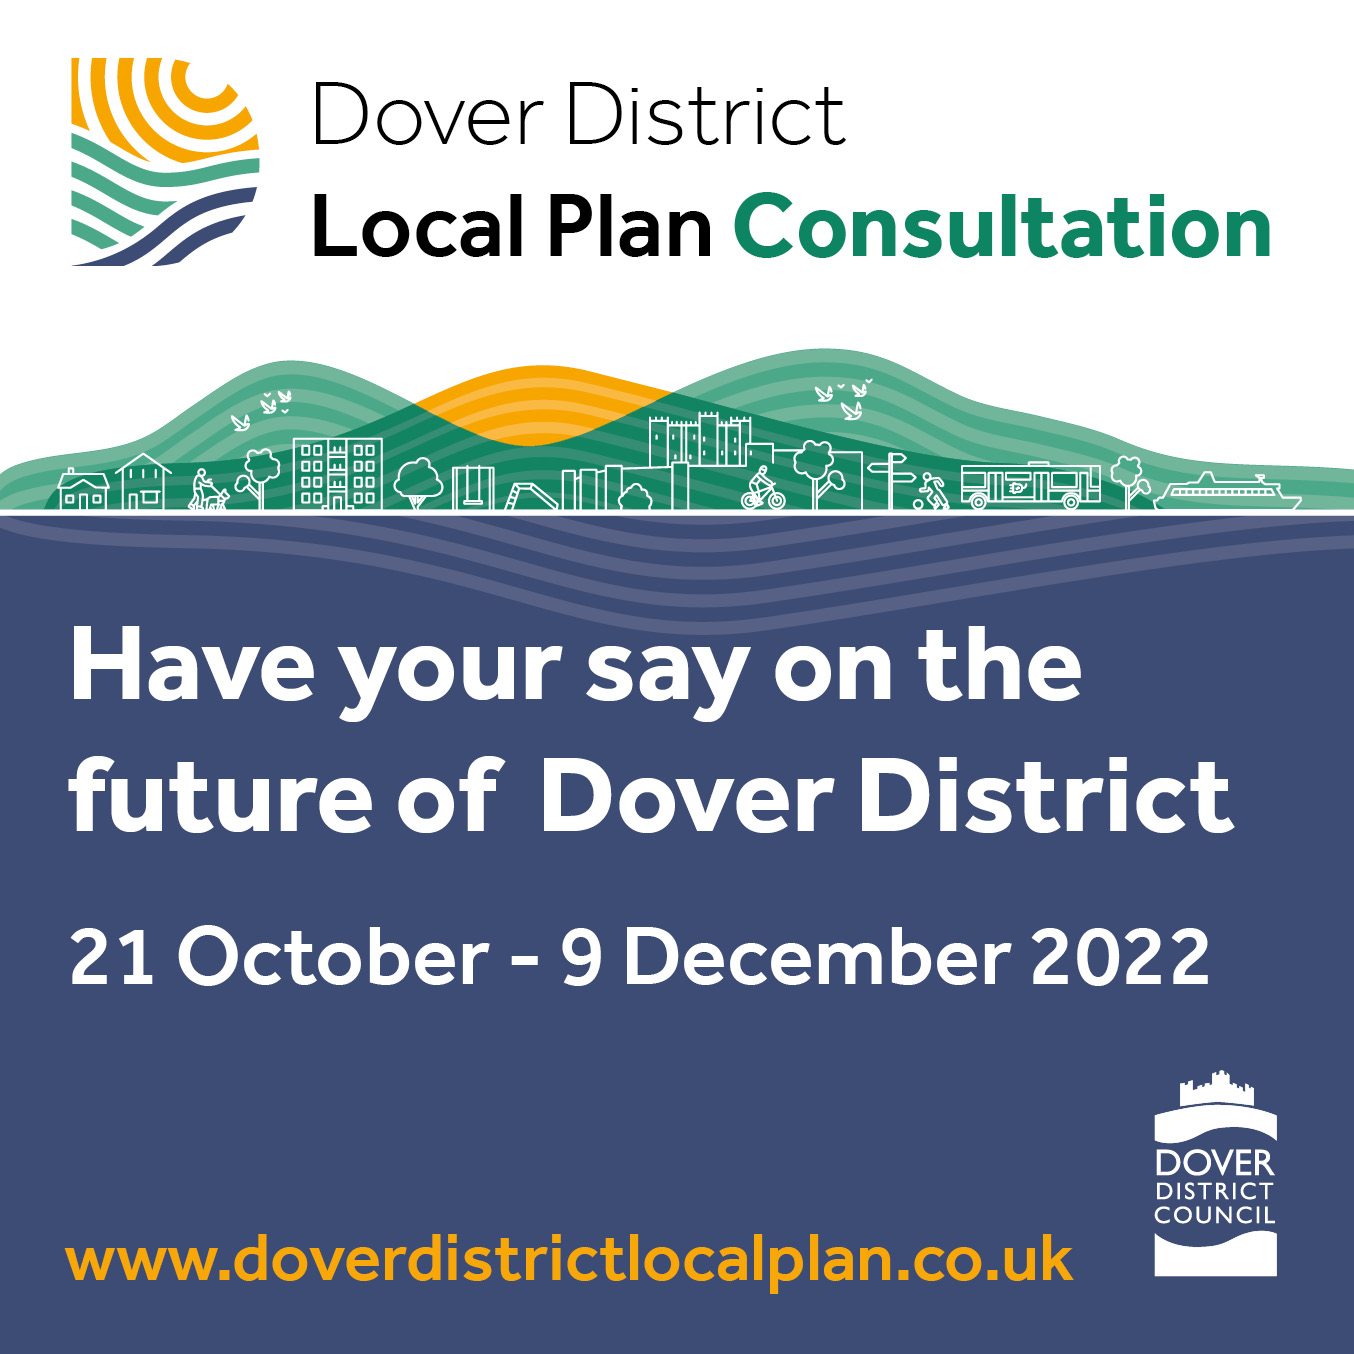 Dover District Local Plan Consultation - Have your say on the future of Dover District. 21 October - 9 December 2022. www.doverdistrictlocalplan.co.uk